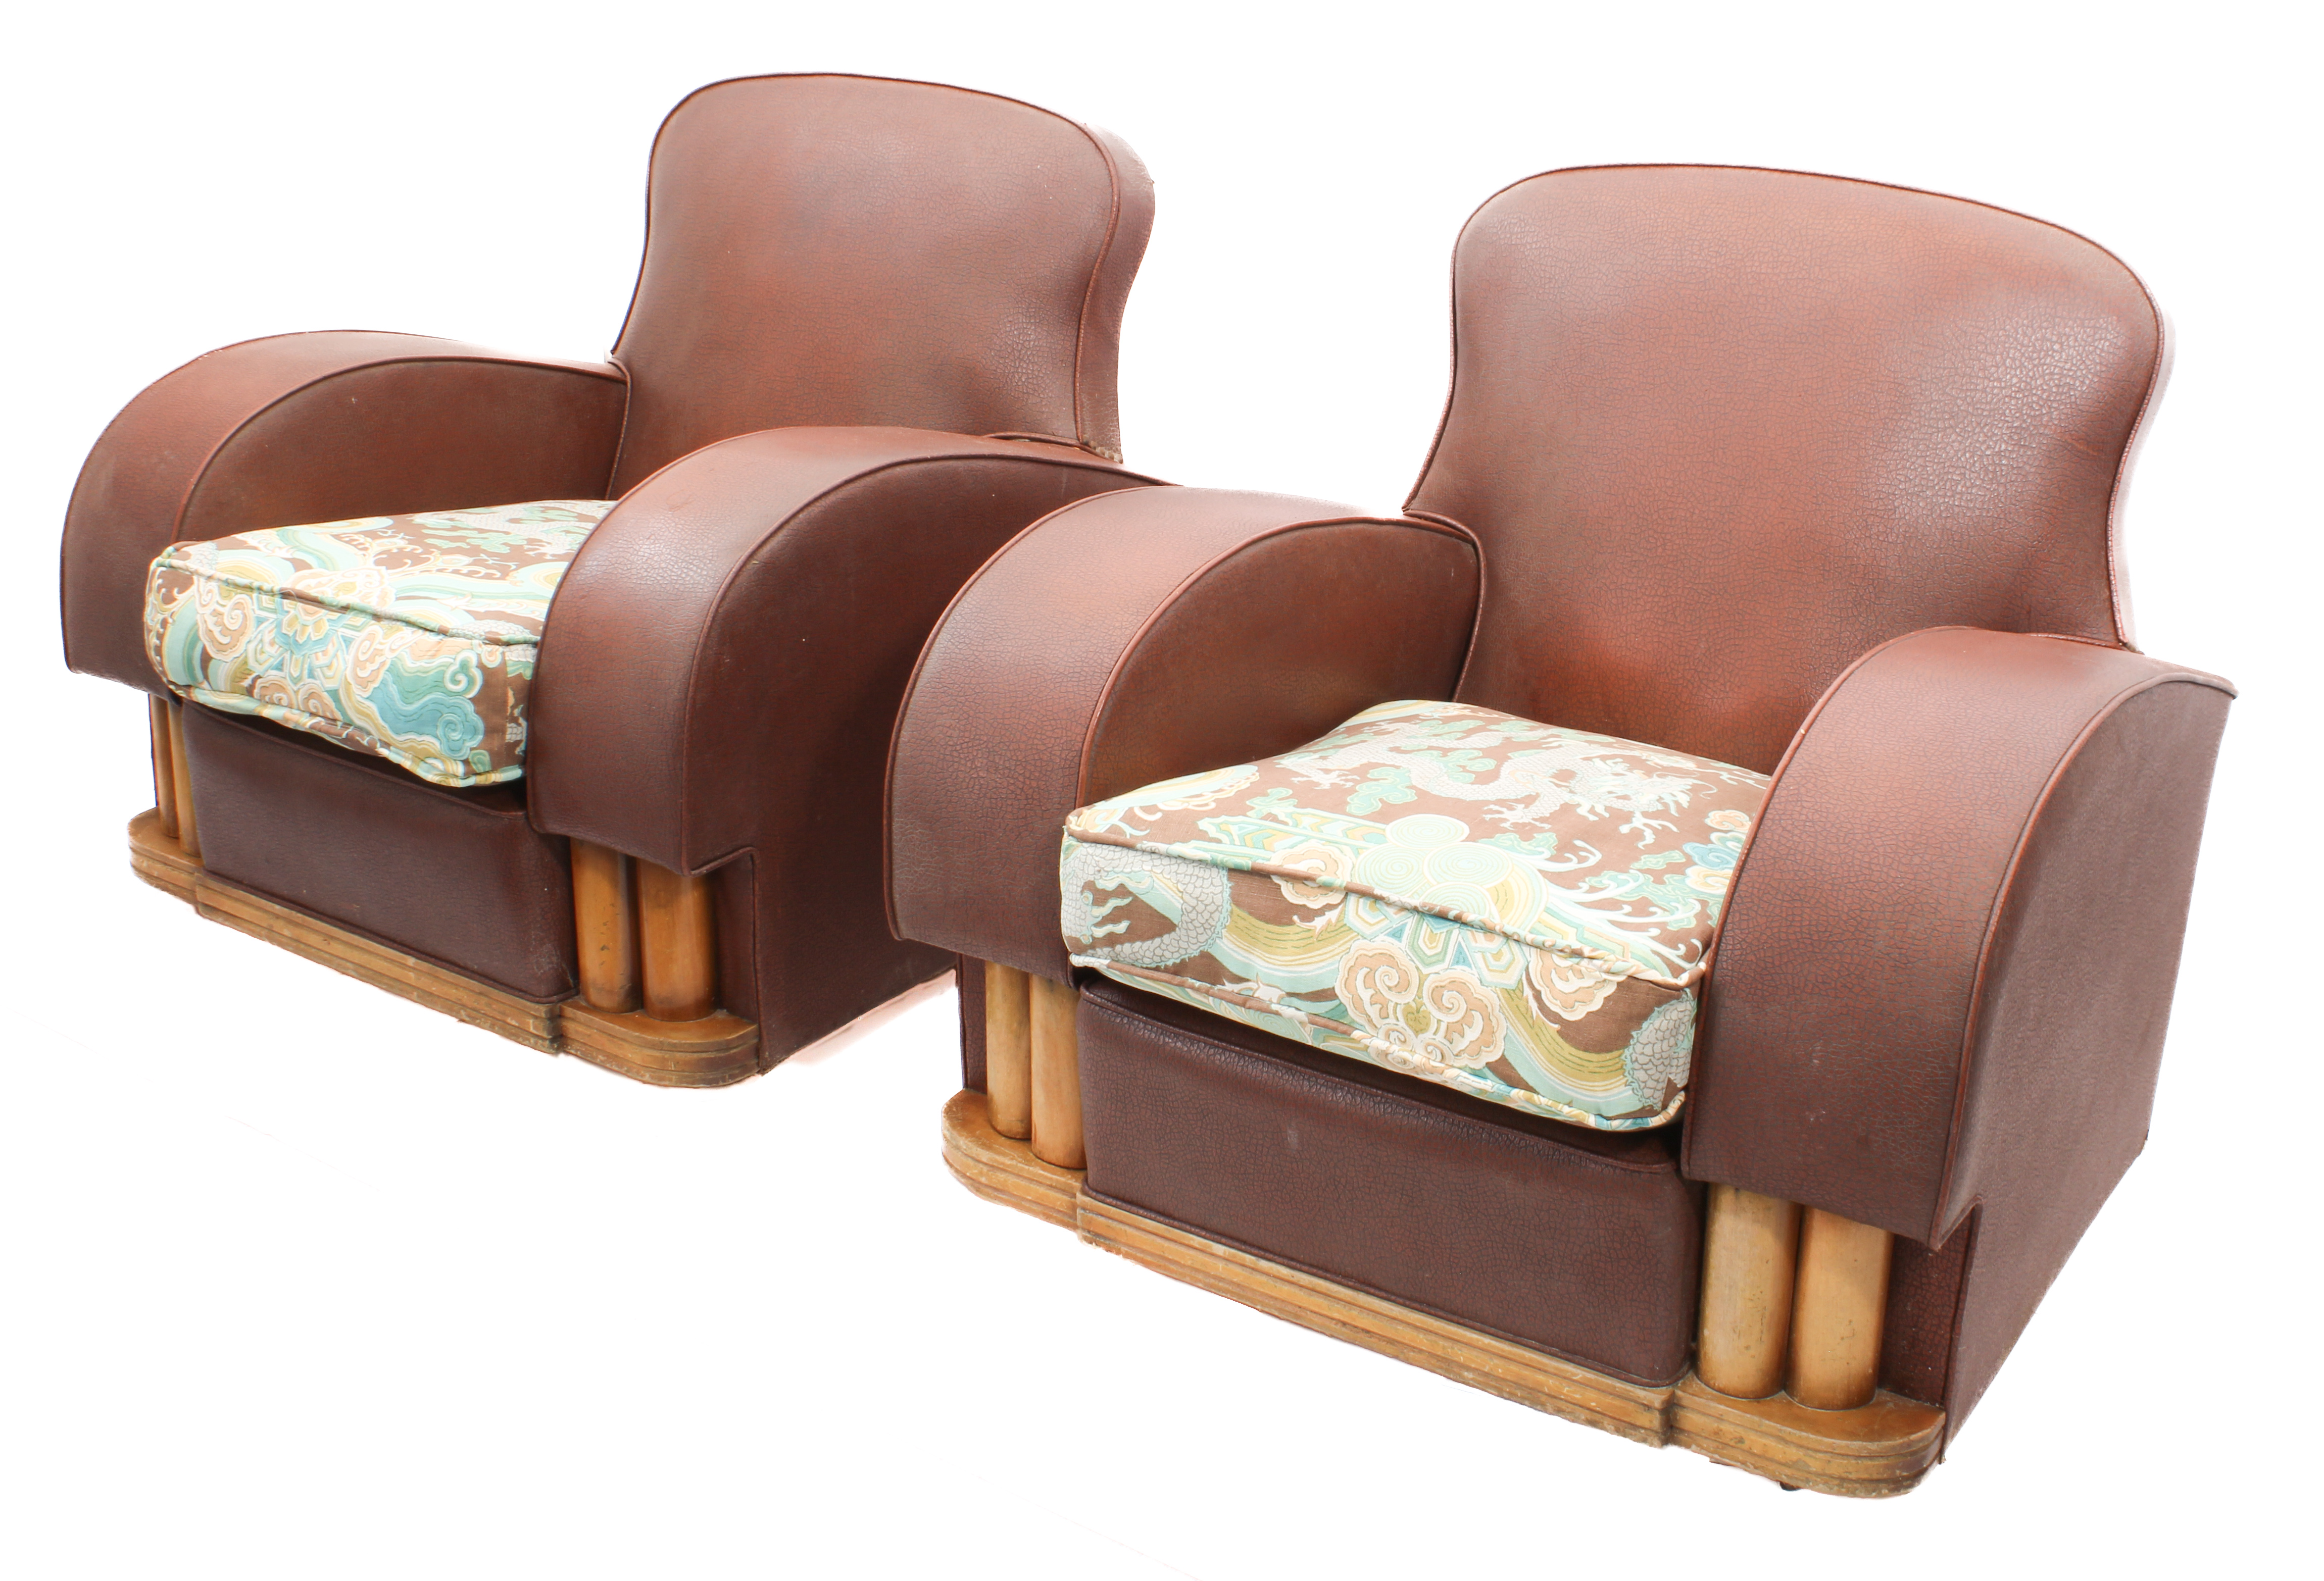 A pair of mid-century Art Deco style armchairs - upholstered in brick red faux-leather, with later